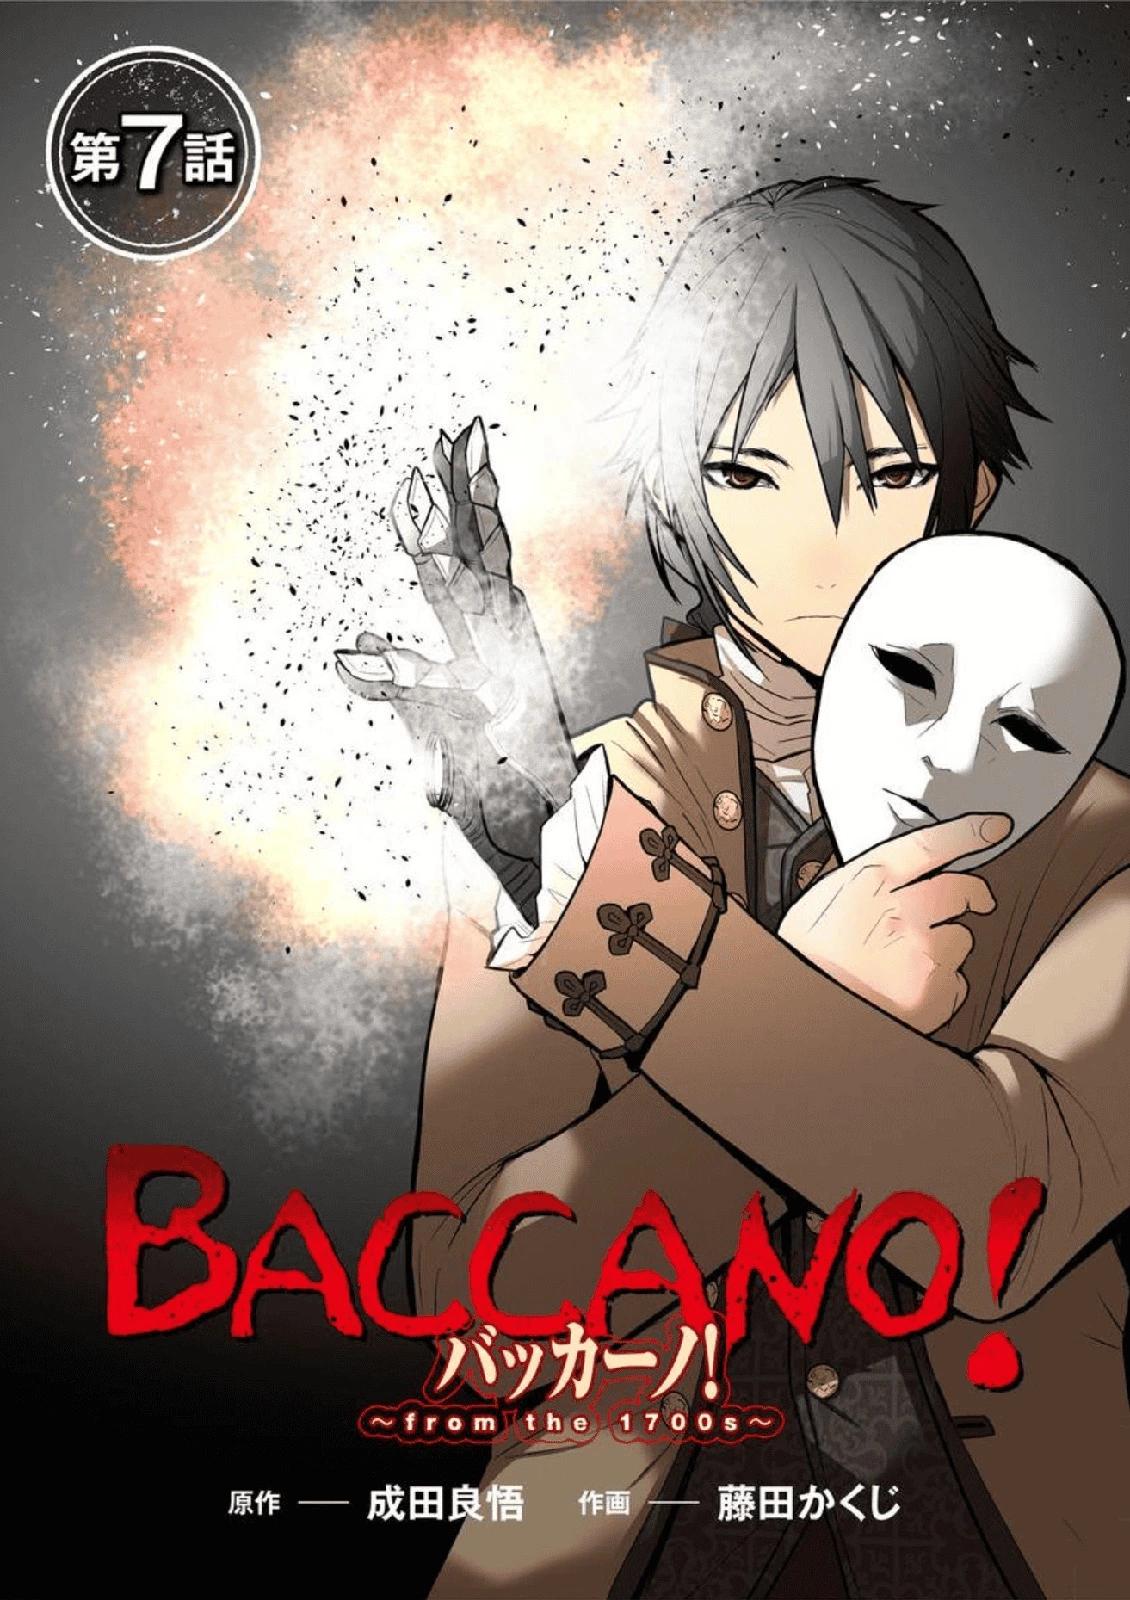 BACCANO! 永生之酒！~from the 1700s~ - 第07話 - 1